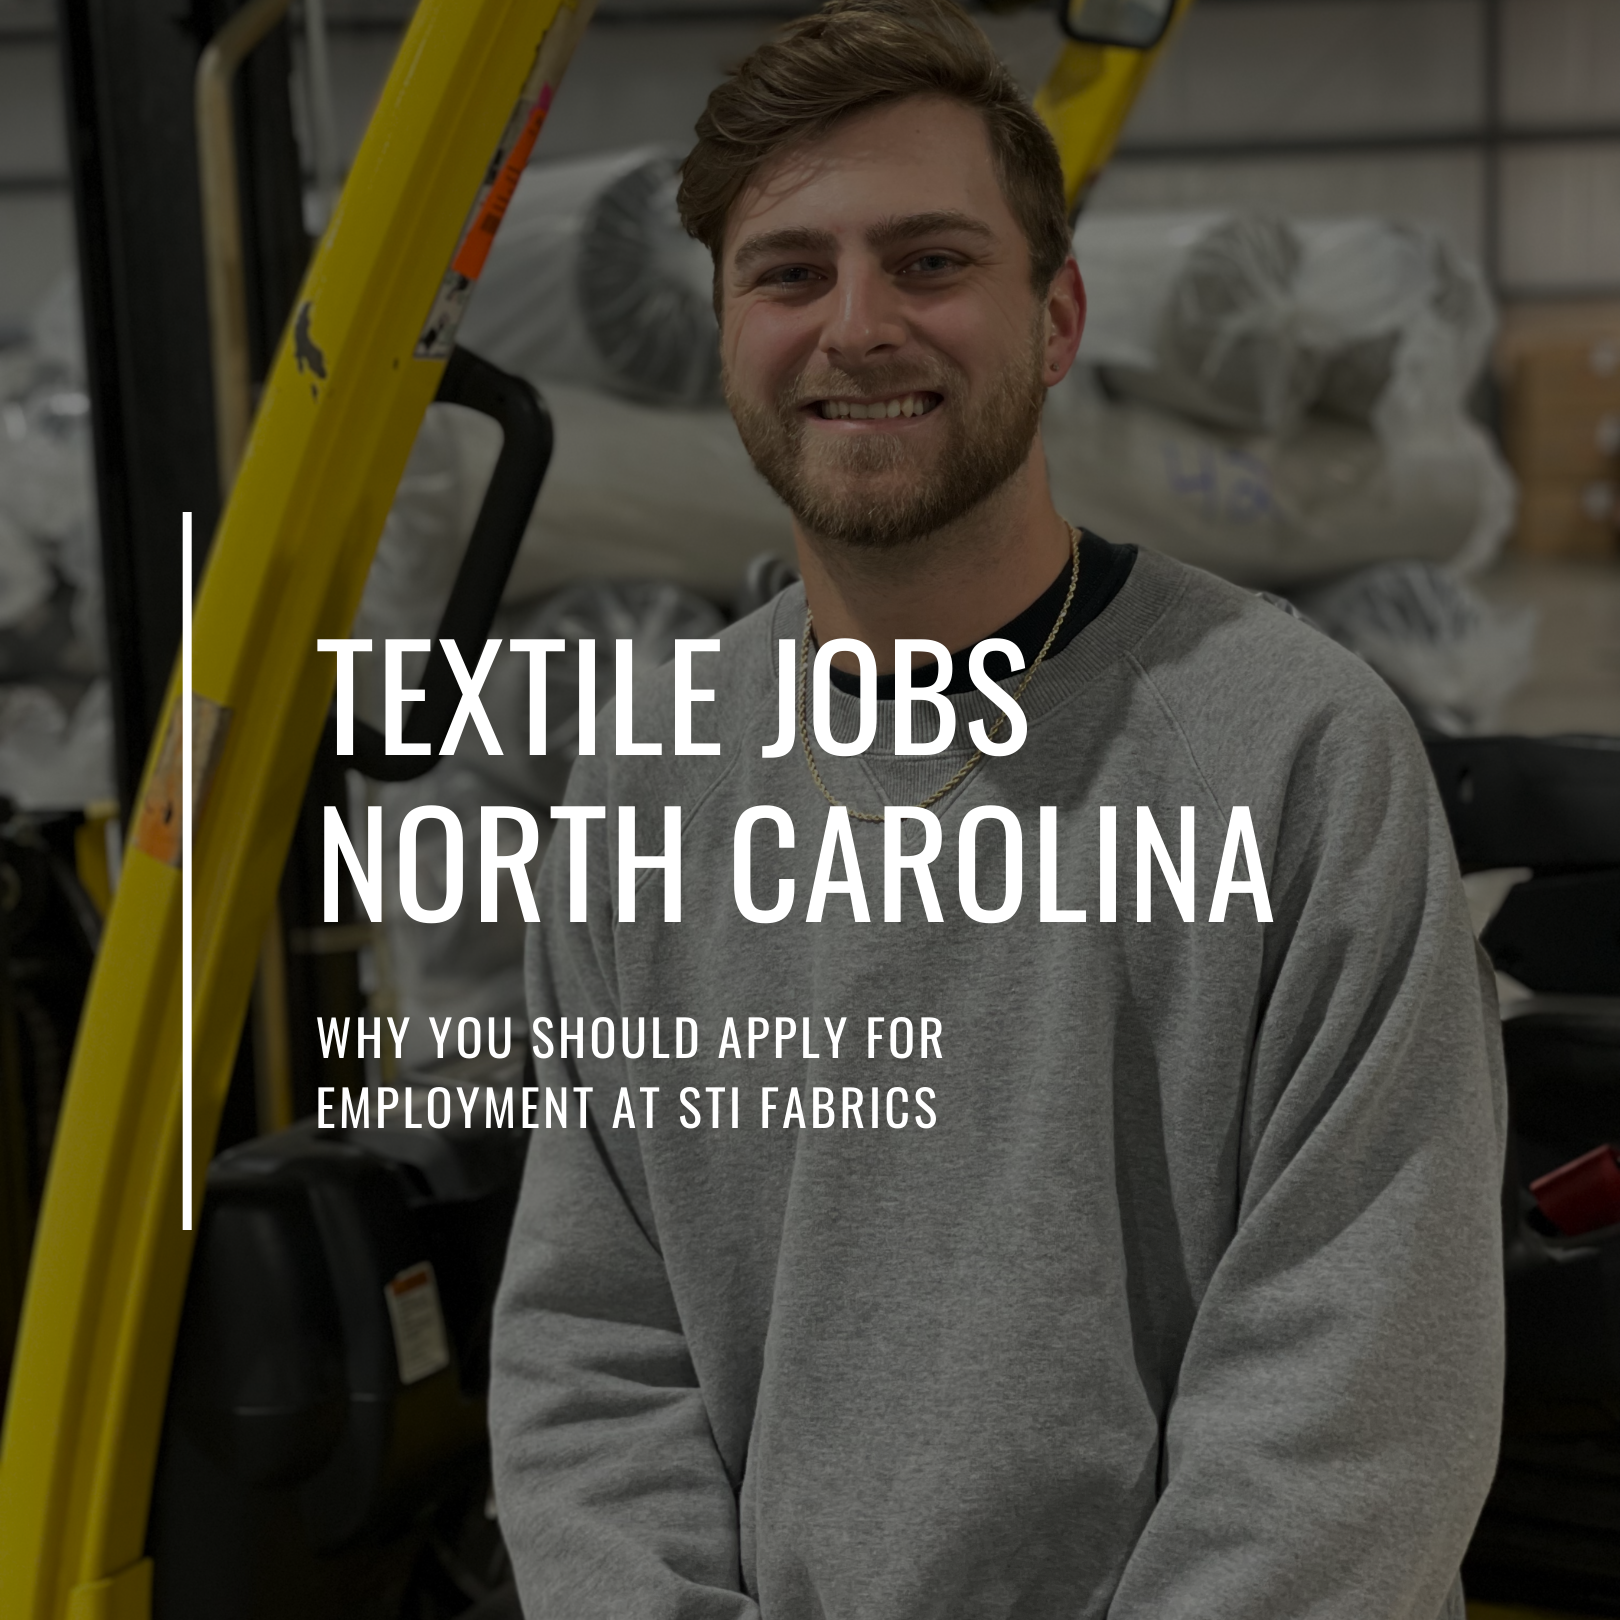 Textile Jobs North Carolina - Why you should apply for employment at STI Fabrics